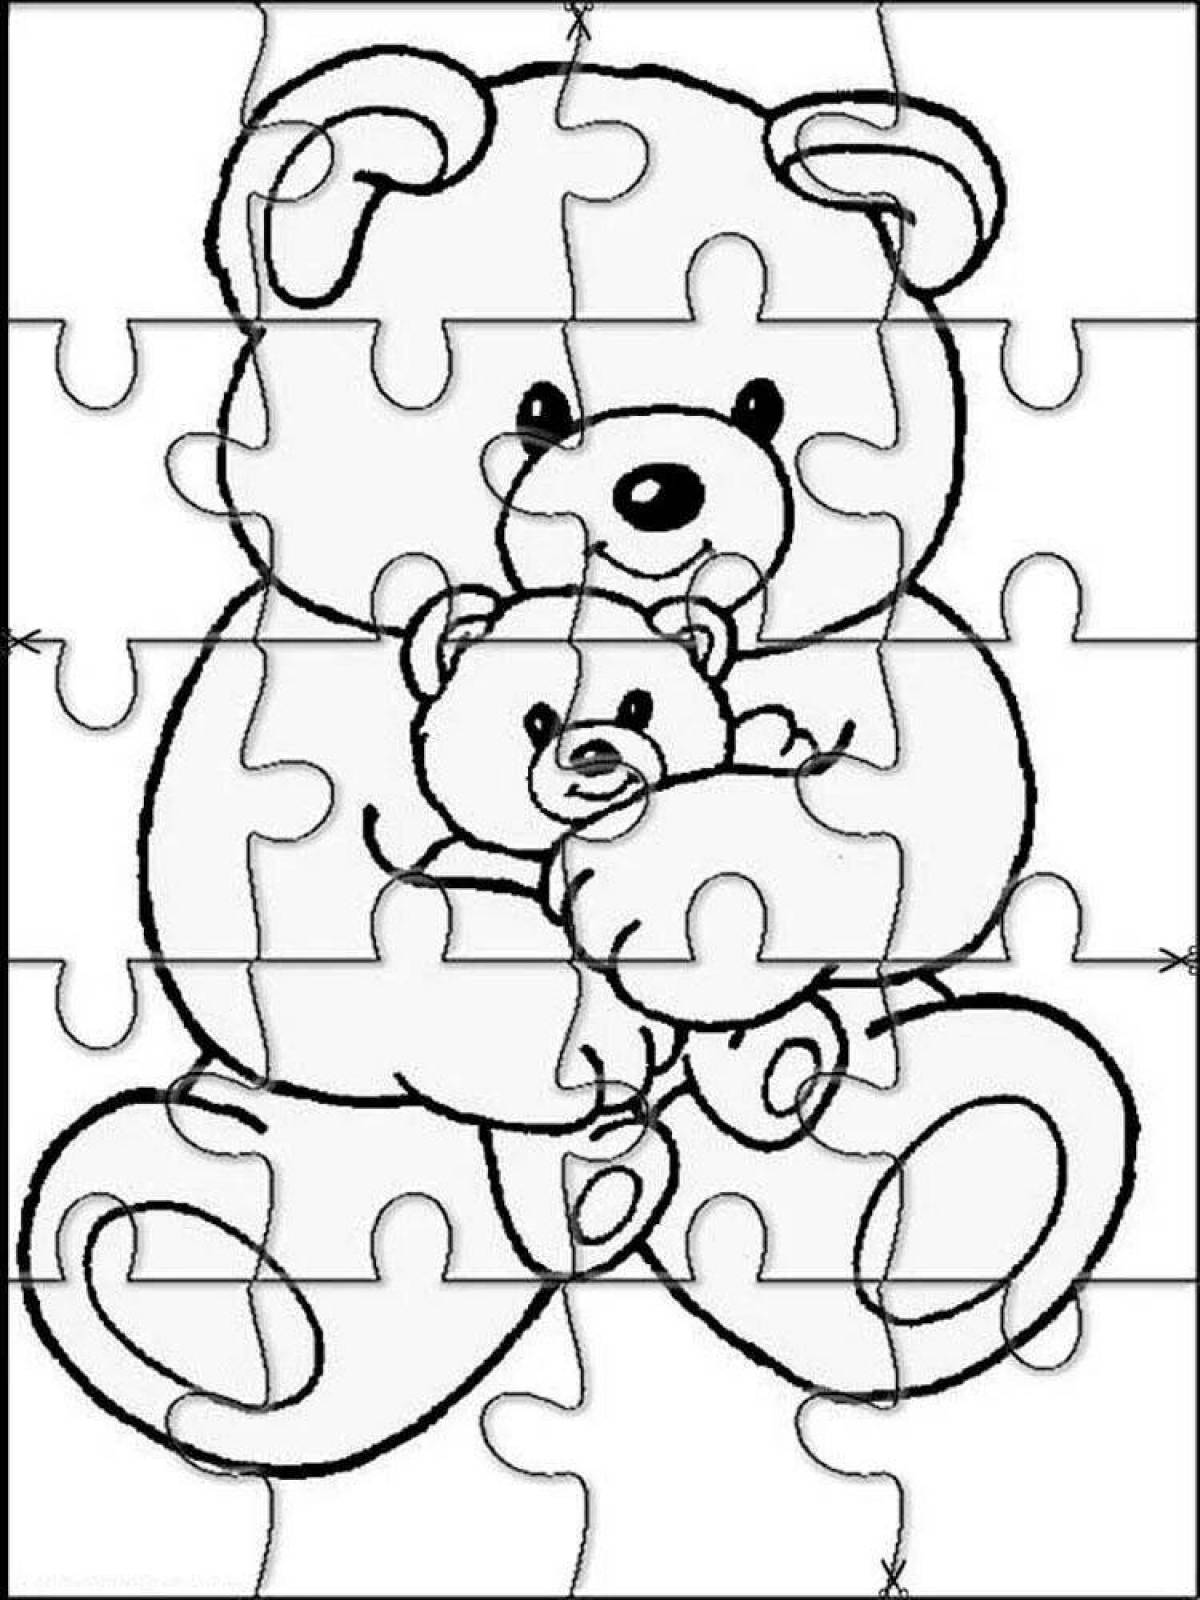 Intriguing puzzle coloring pages